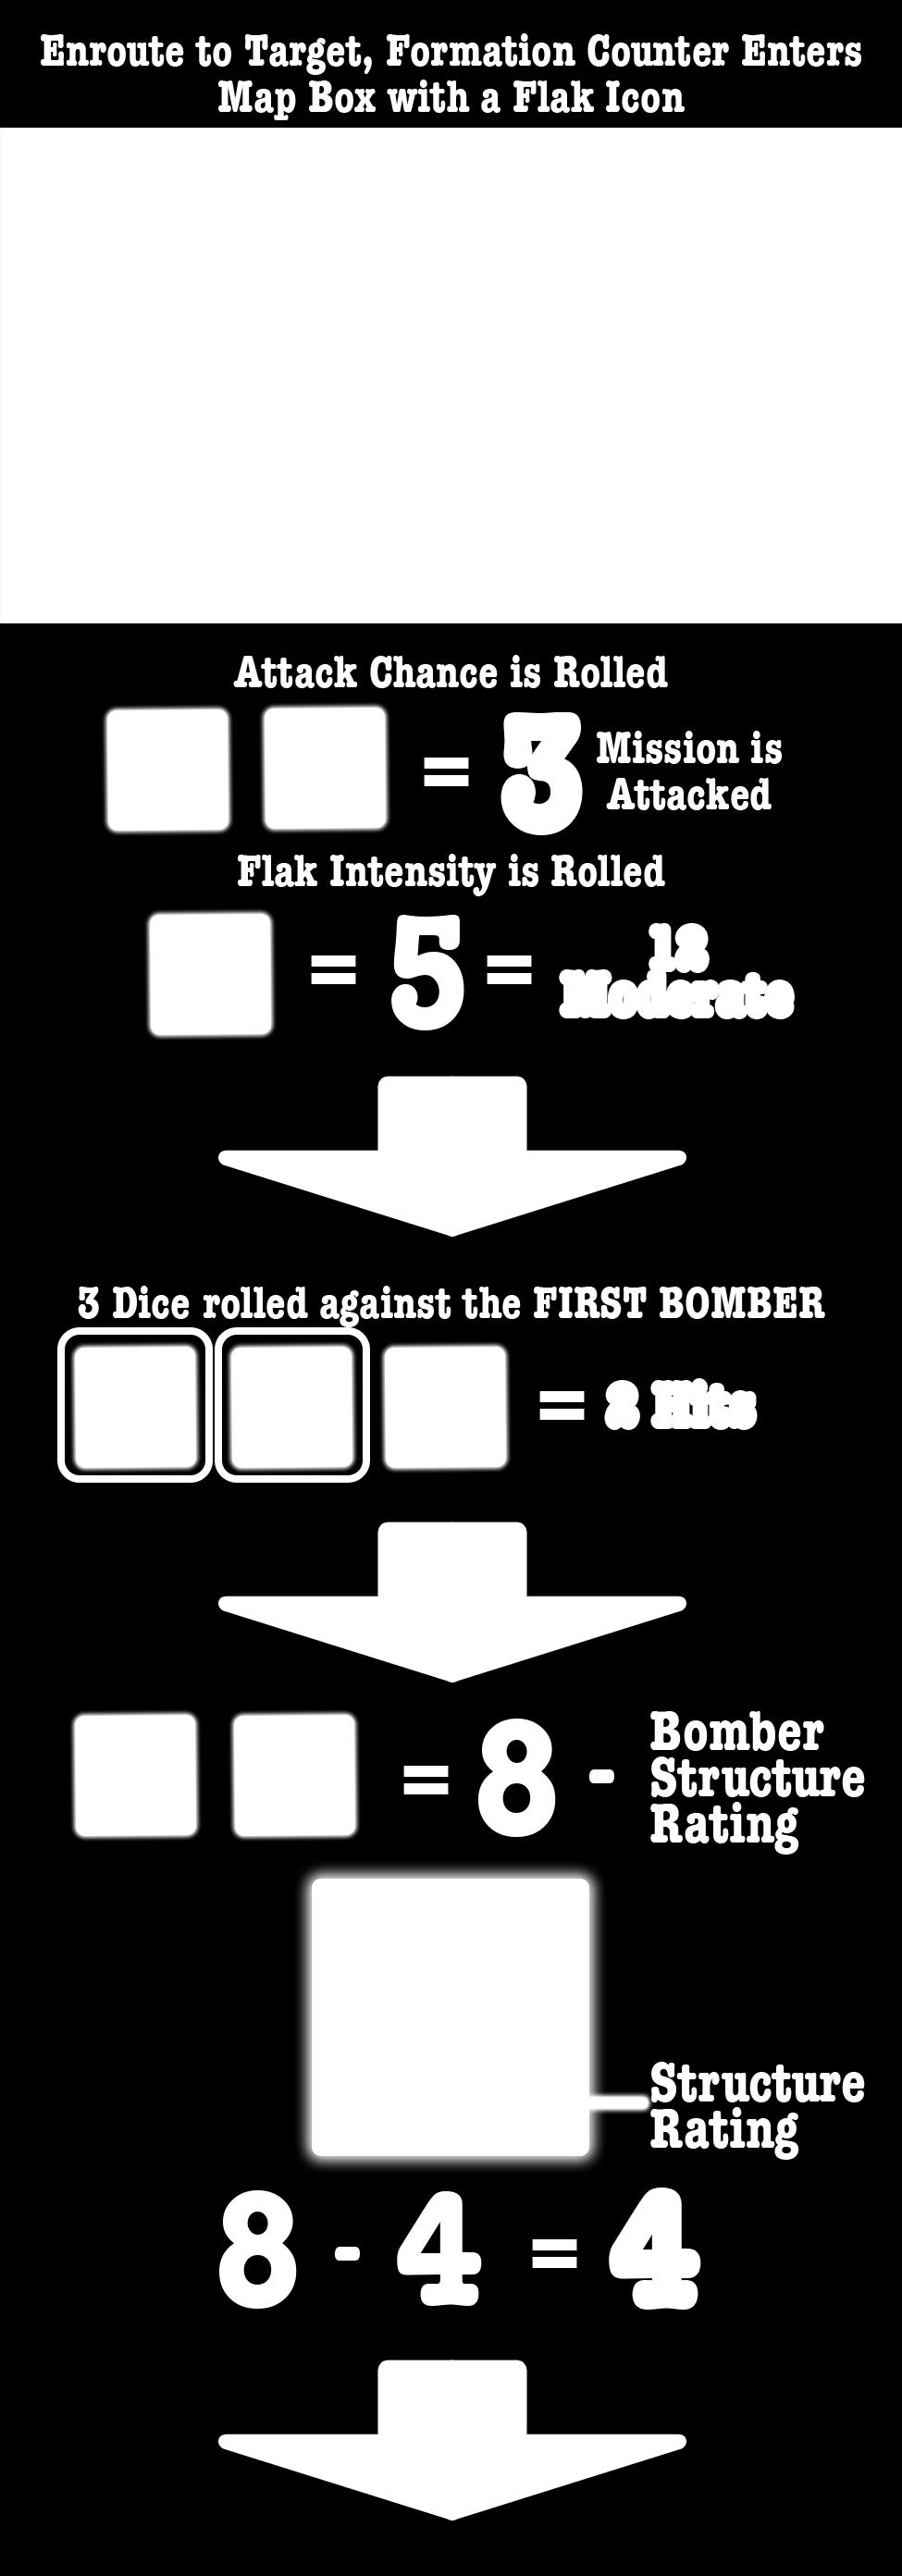 ALL Bombers in the Formation must follow these procedures to determine any Hits and the extent of any Damage. Three 1d6 Attack dice are rolled resulting in 2, 6, 6; two Hits are scored (the 6 s).